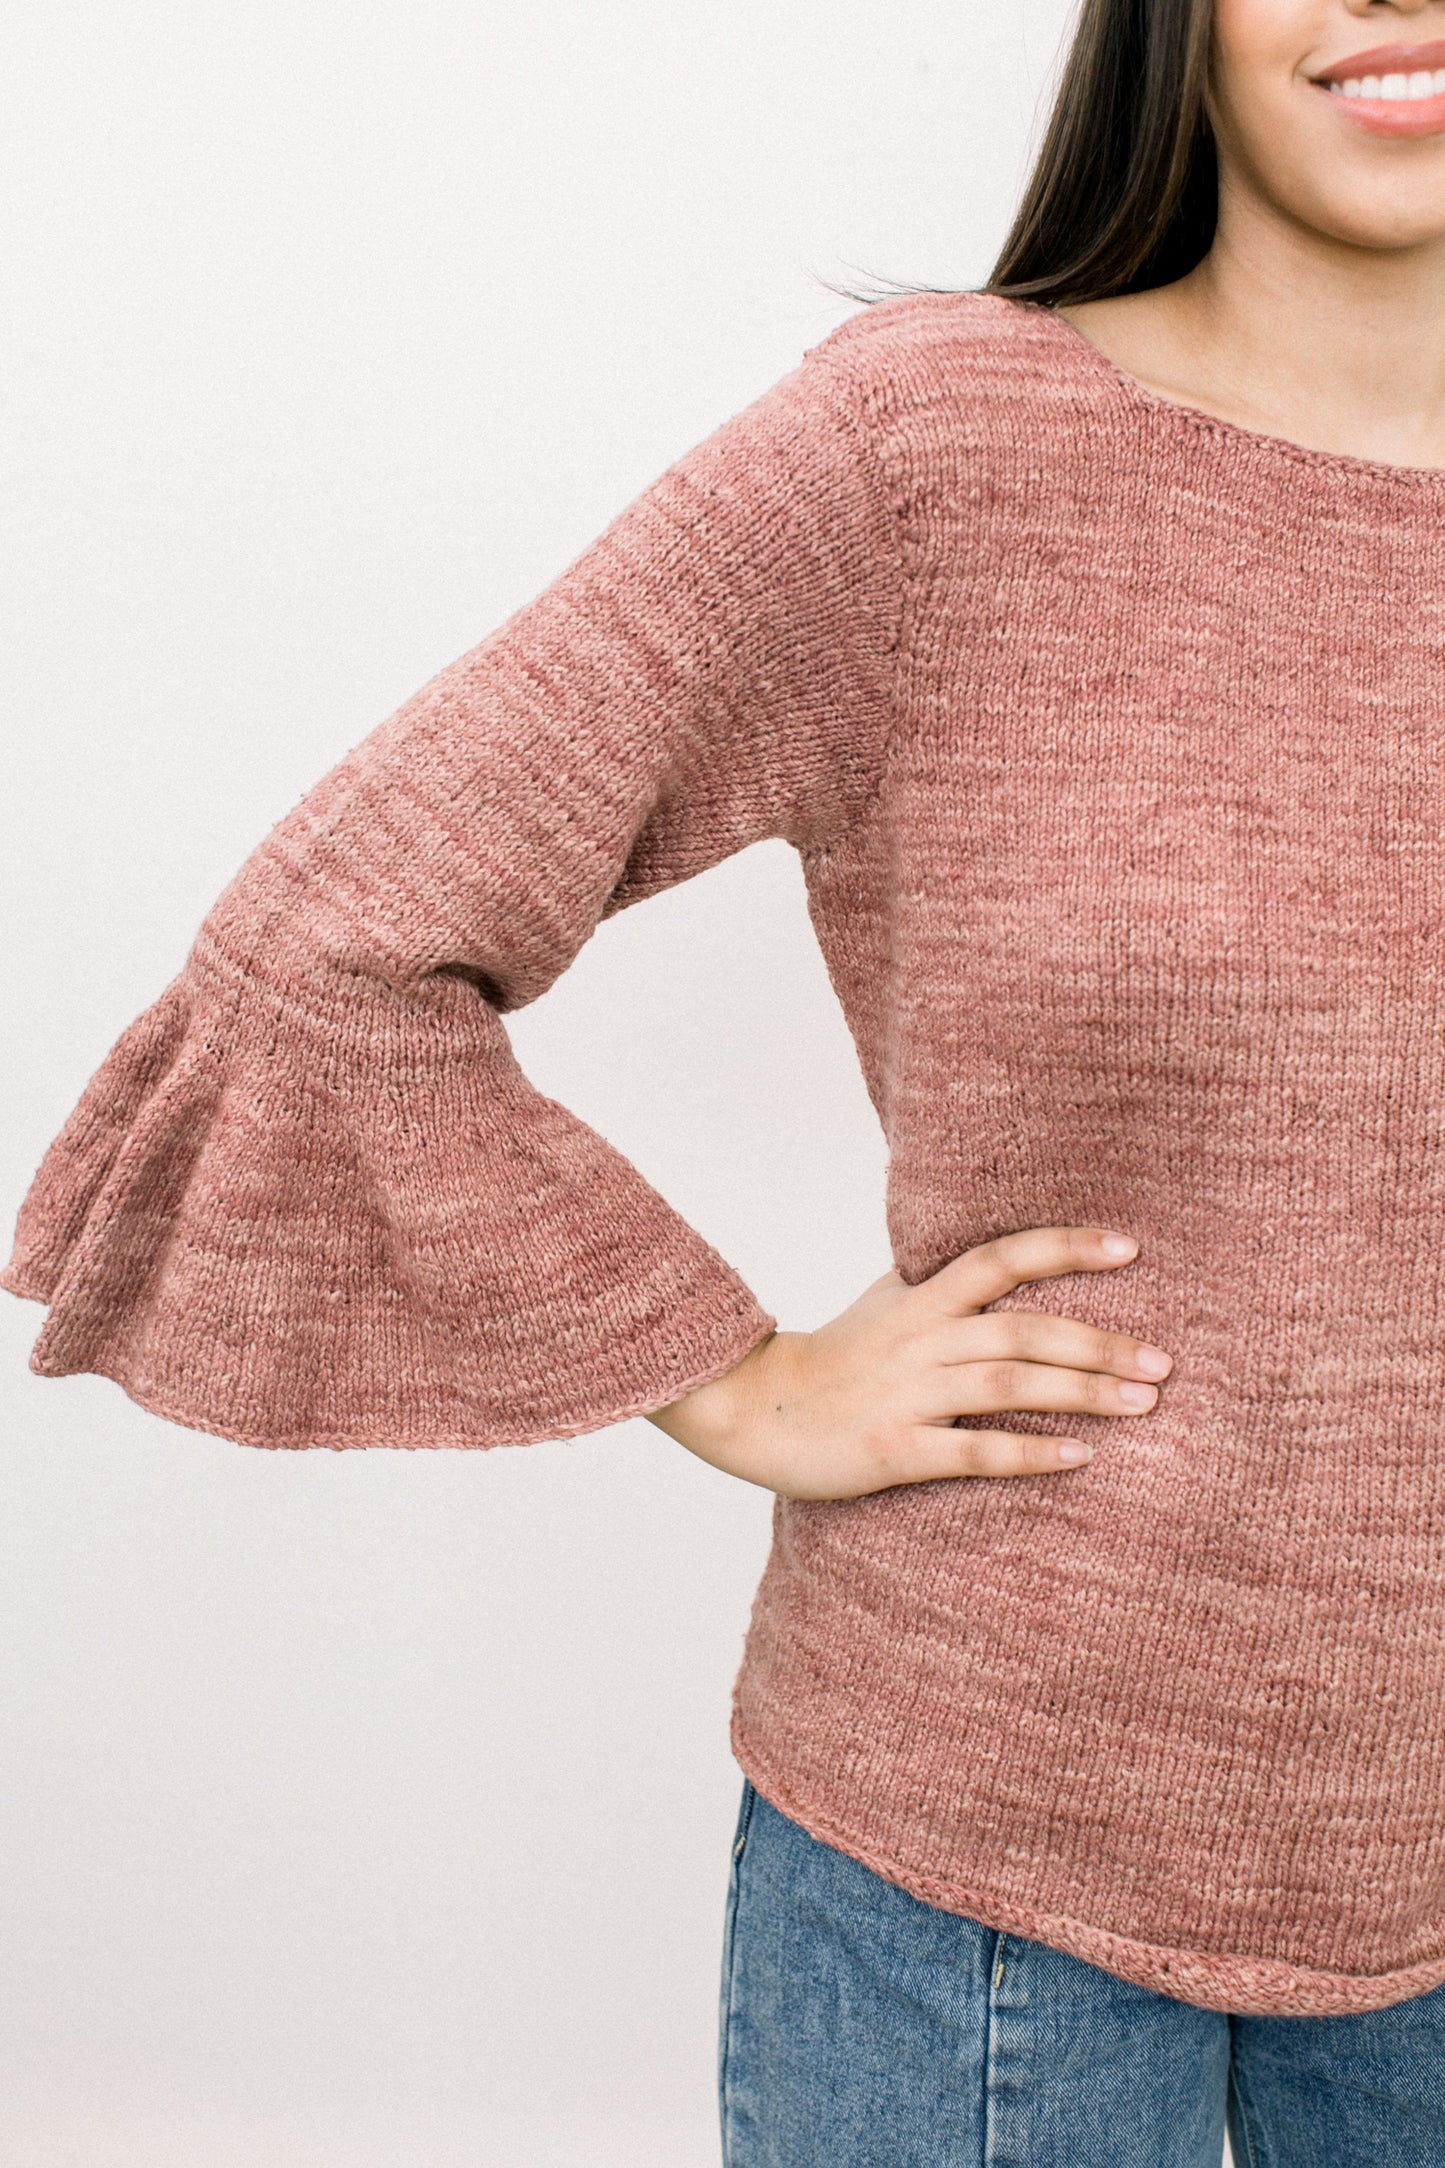 Florida Bell Sweater in Ethiopian Cotton